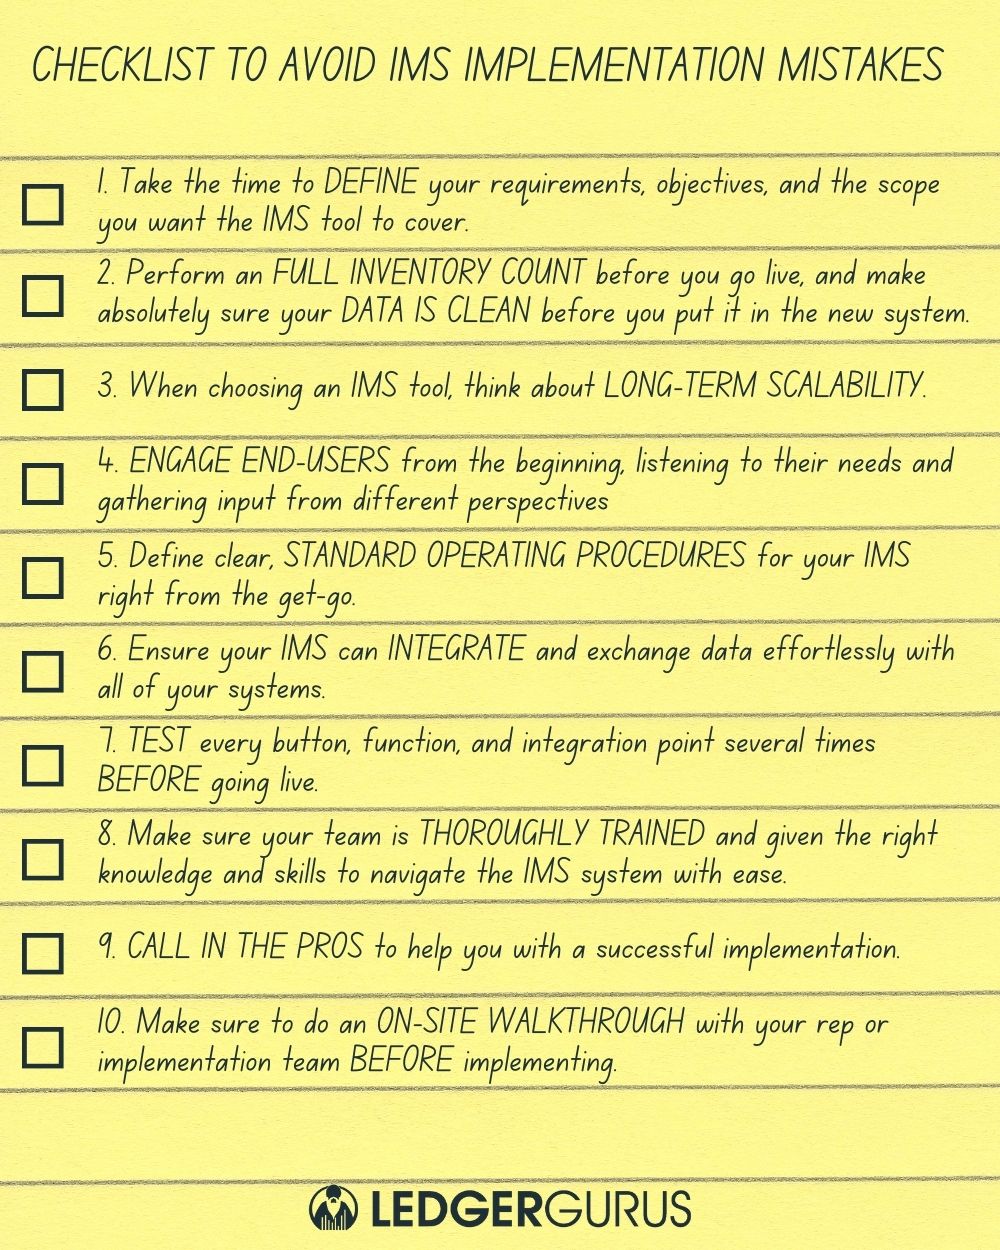 checklist to avoid IMS implementation mistakes